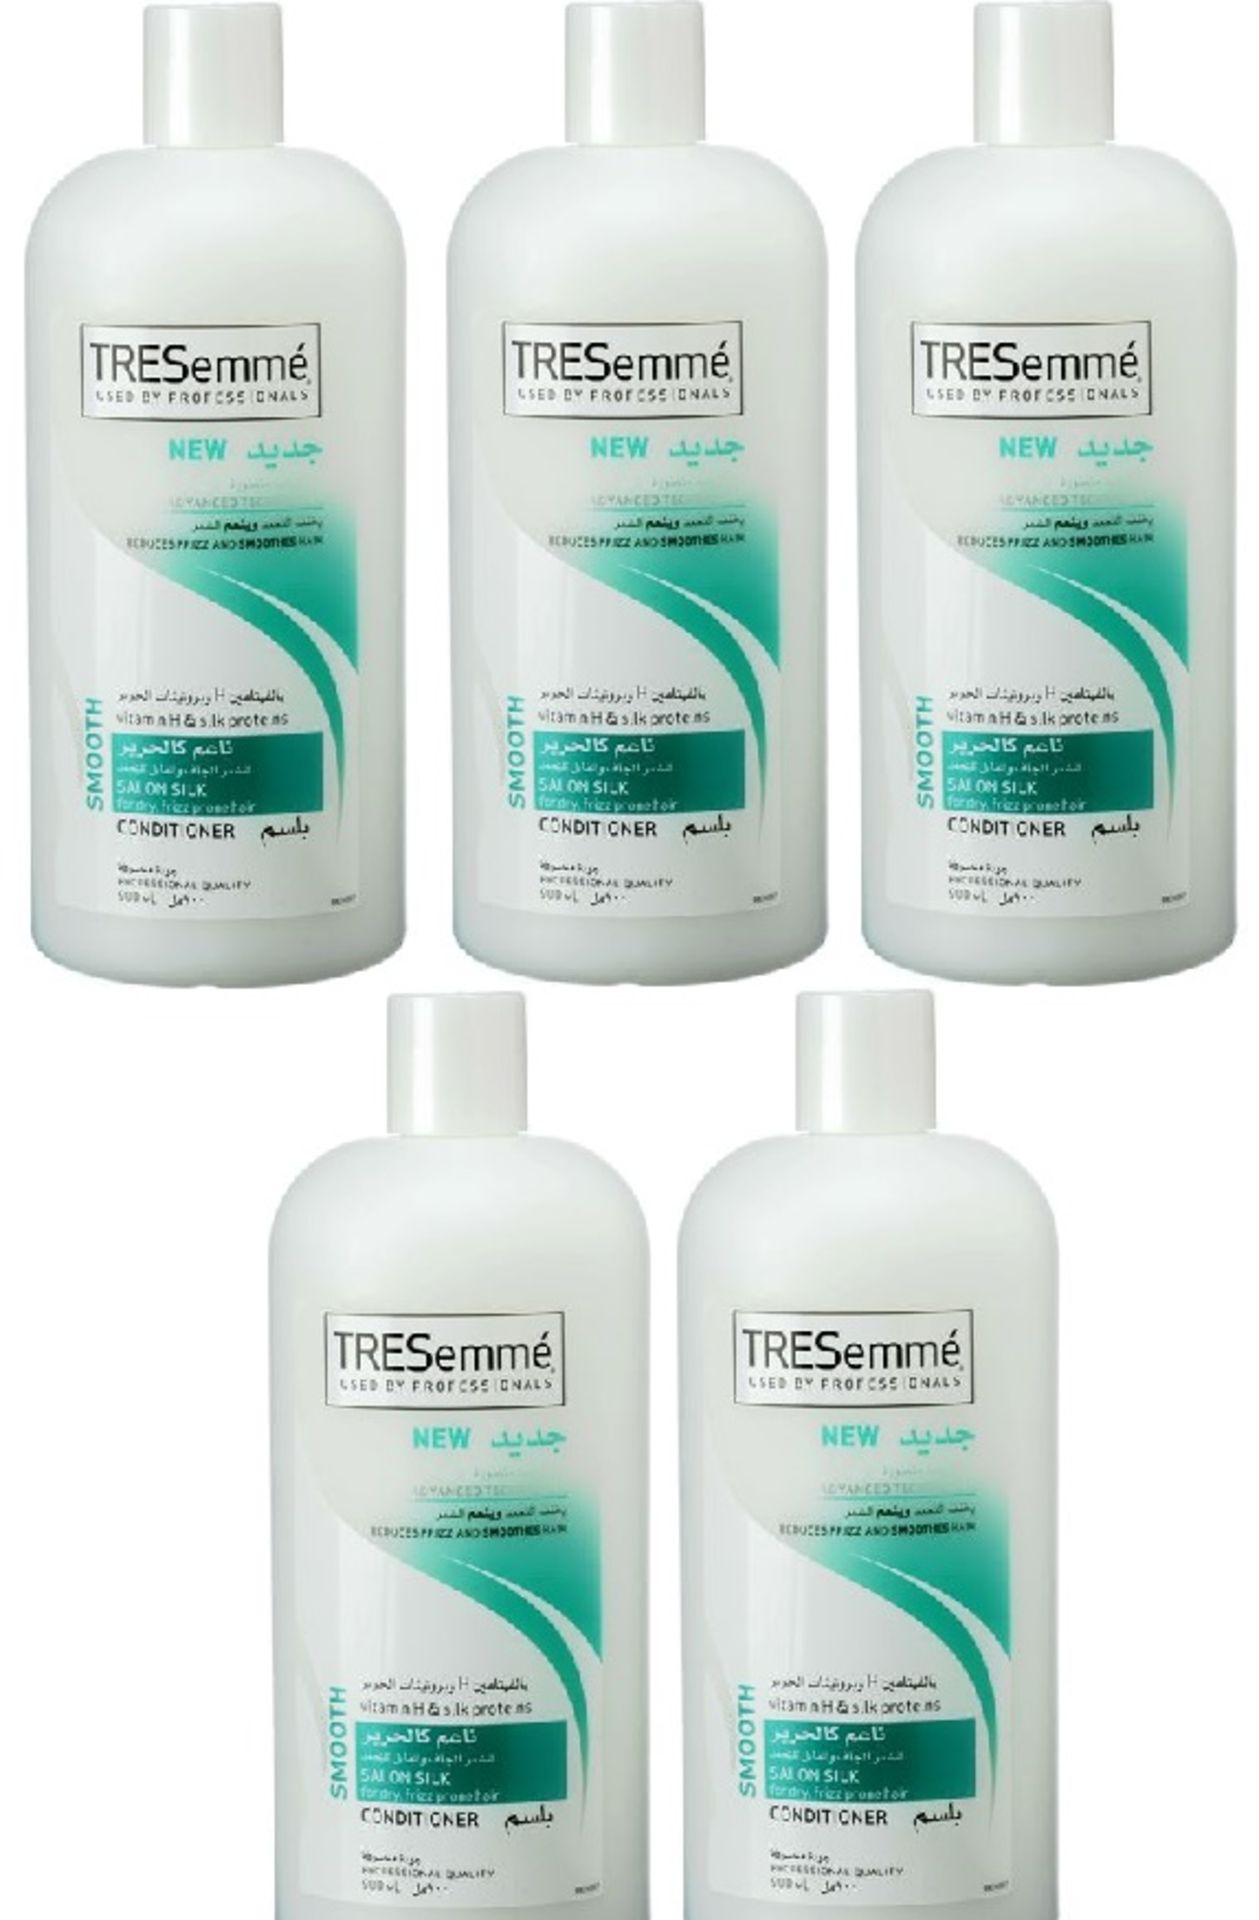 V *TRADE QTY* Brand New Lot Of 5 TRESemme Professional Salon Silk Conditioner 900ml For Dry, Frizz